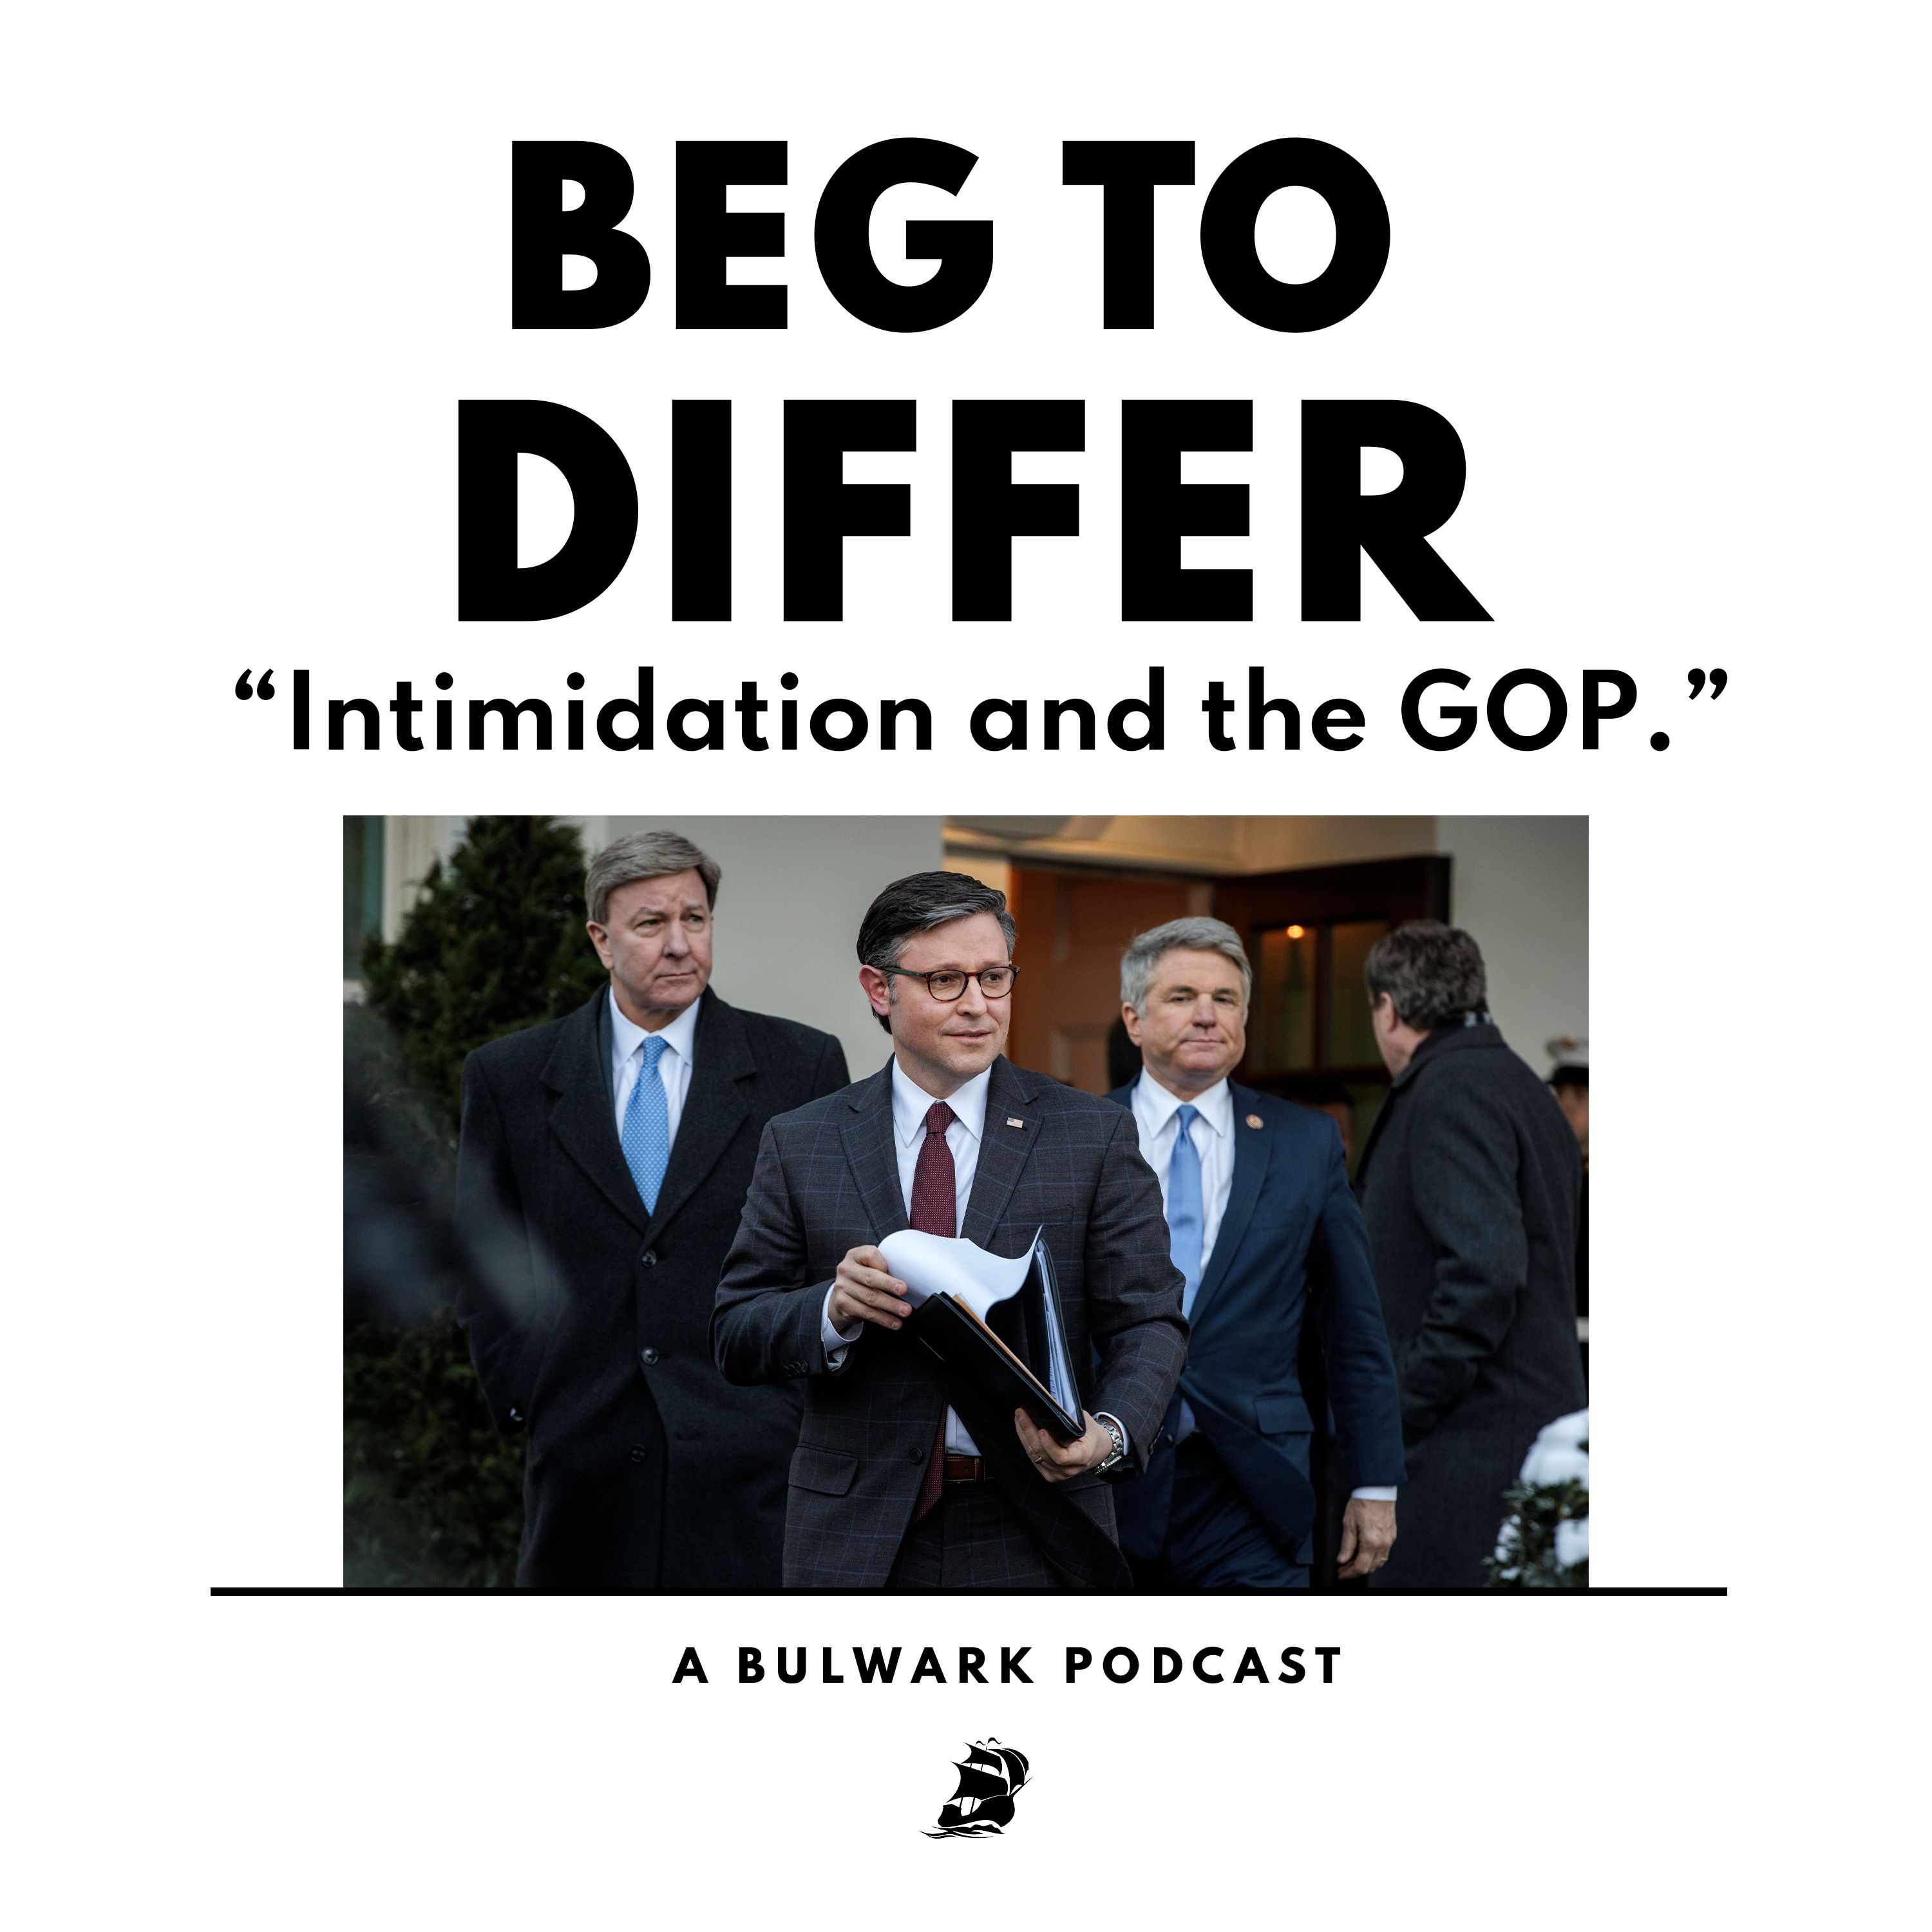 Intimidation and the GOP